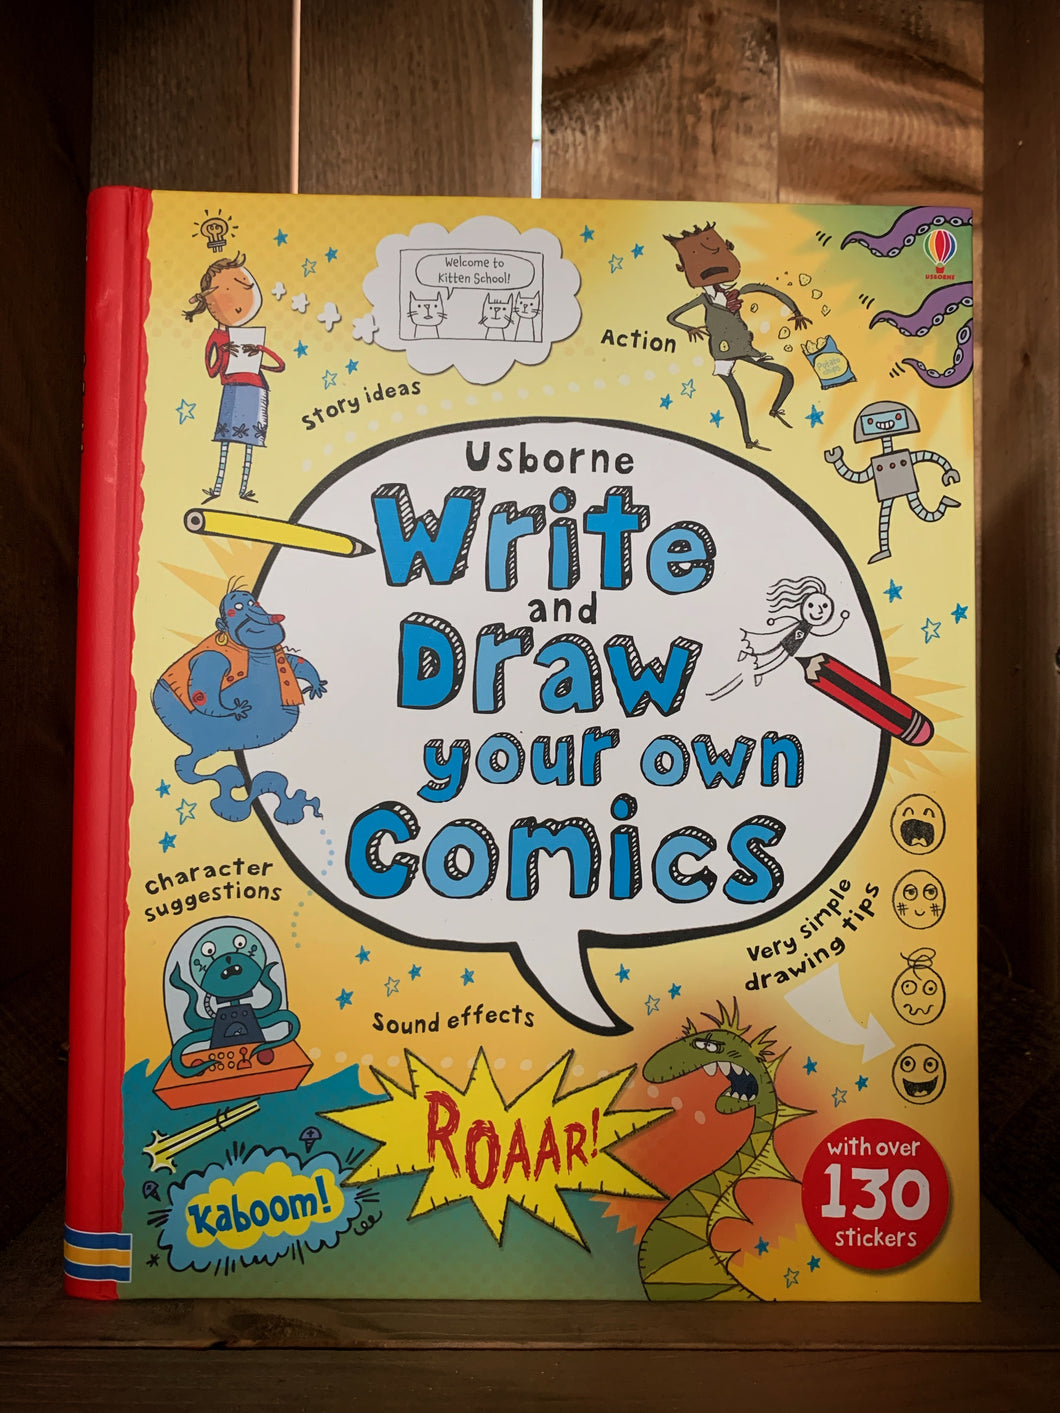 Image of the front of the book Write and Draw Your Own Comics. The cover has a yellow background, with a red spine. The title is written in the center inside a large comic style text bubble, and is surrounded by illustrations of creative creatures and sound effect bubbles, including a dragon, a genie, and an alien. There are small amounts of text around the illustrations explaining what the book can help with, including simple drawing tips, character suggestions, and story ideas.